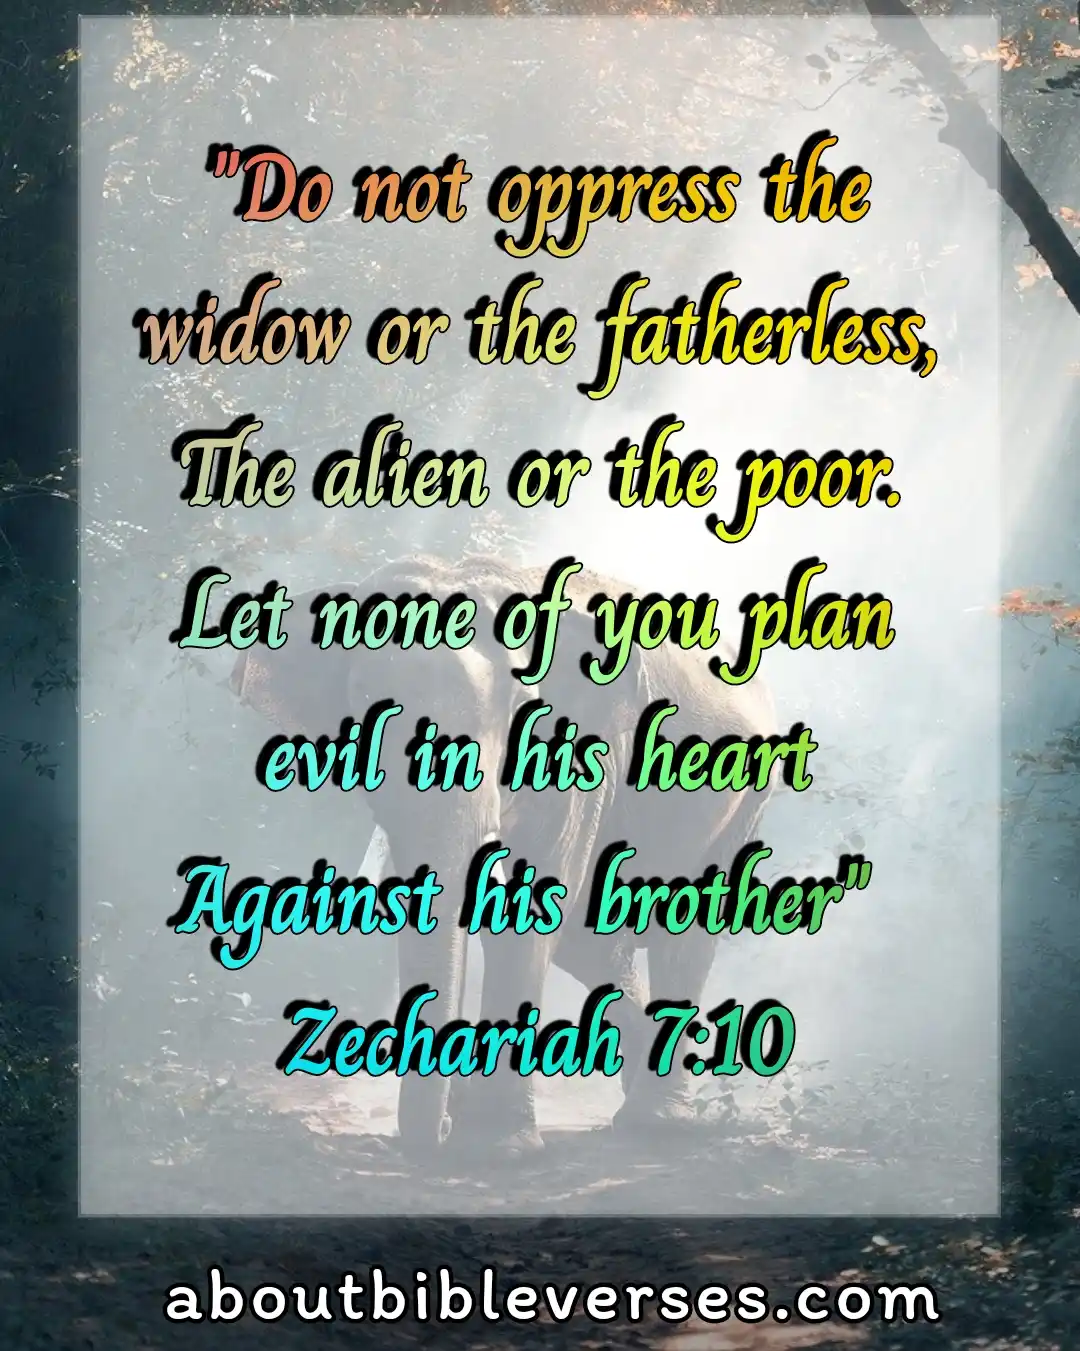 Bible Verse About Helping And Giving To The Poor (Zechariah 7:10)